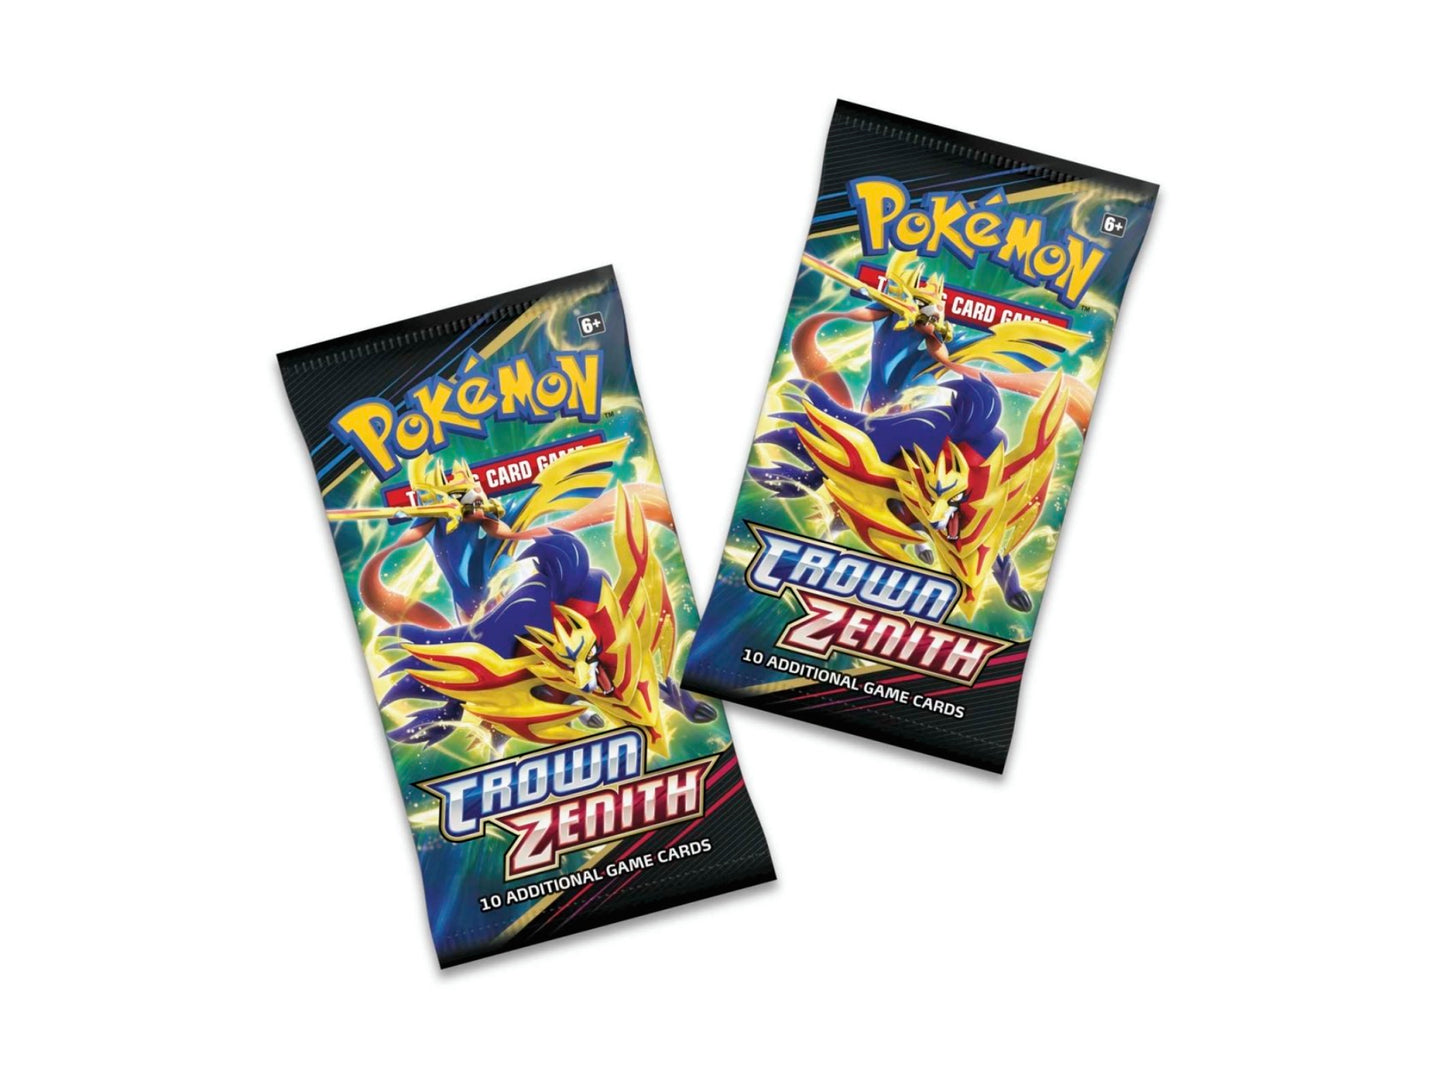 Pokémon Crown Zenith: Booster Pack (10 Cards)